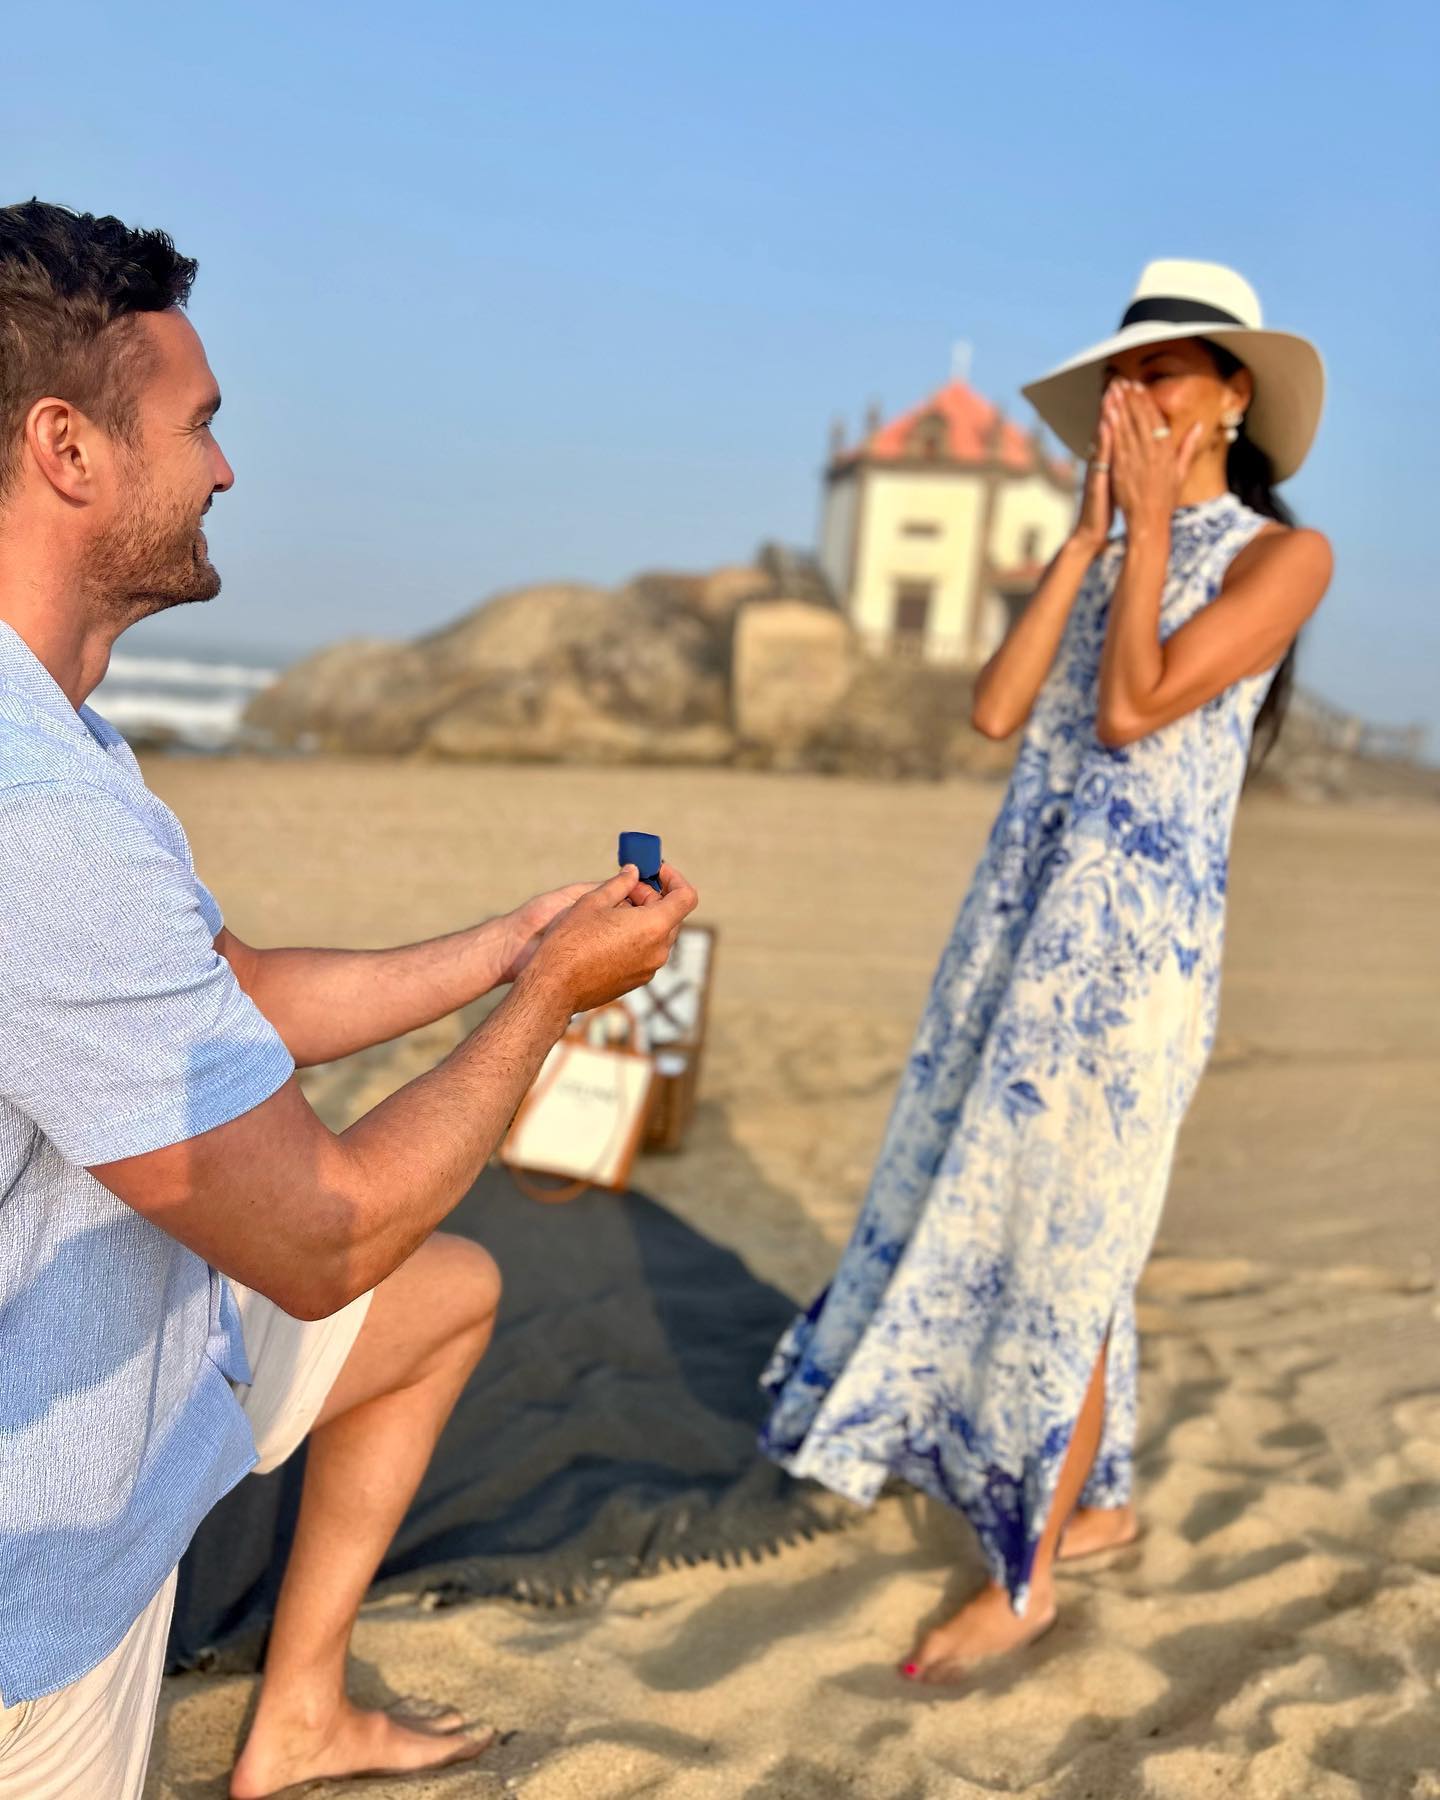 Nicole Scherzinger and Thom Evans Take Their Relationship to the Next Level with an Engagement Announcement